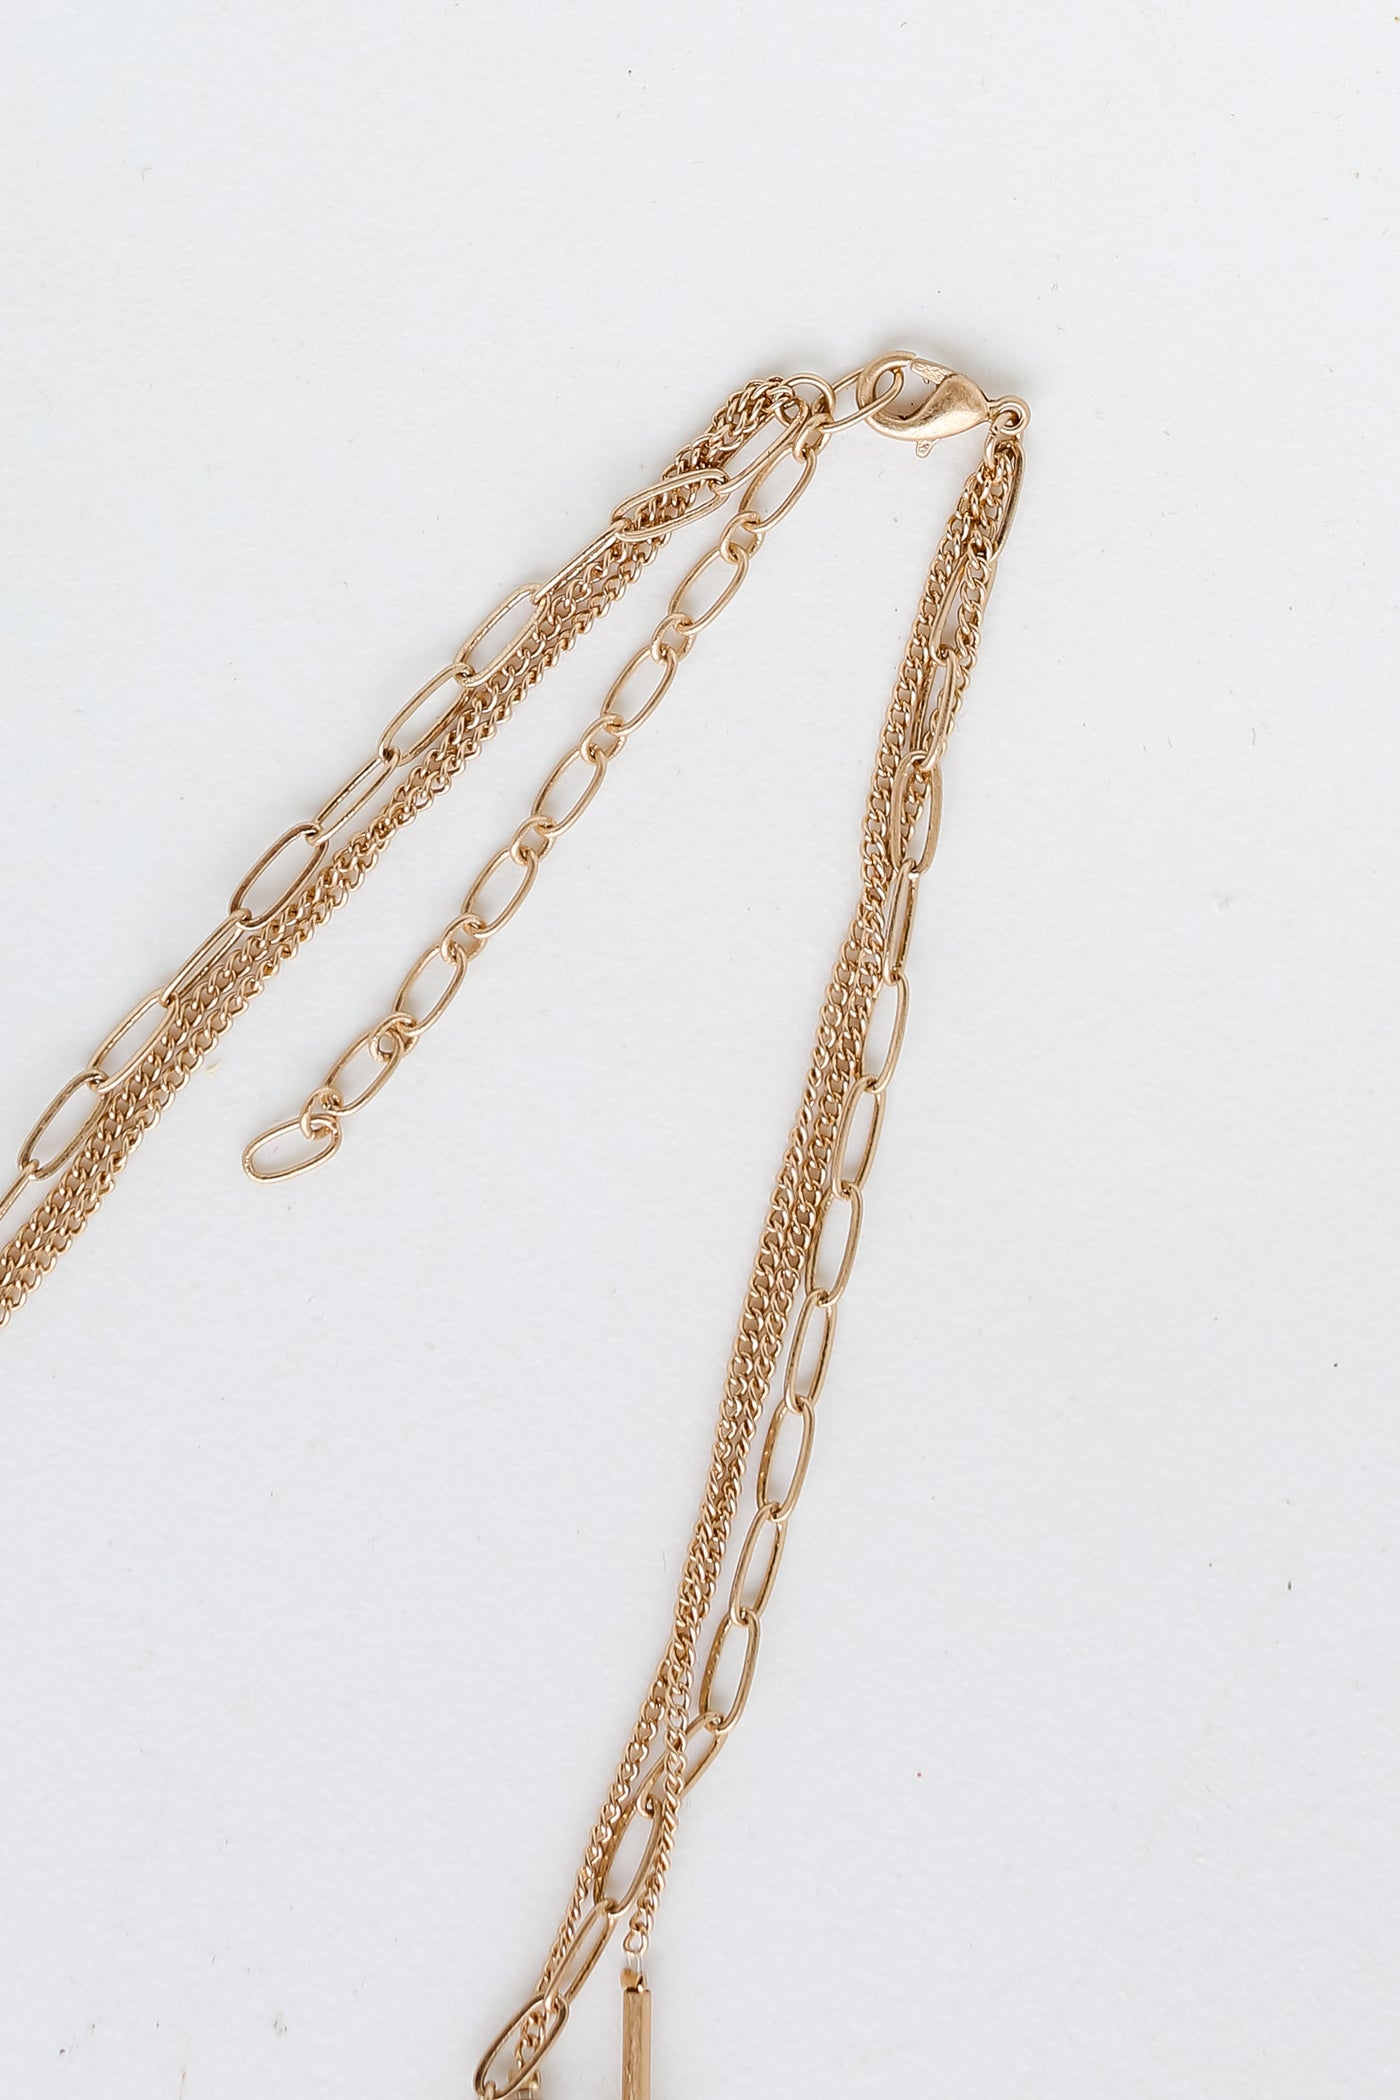 Gold Beaded Layered Necklace close up